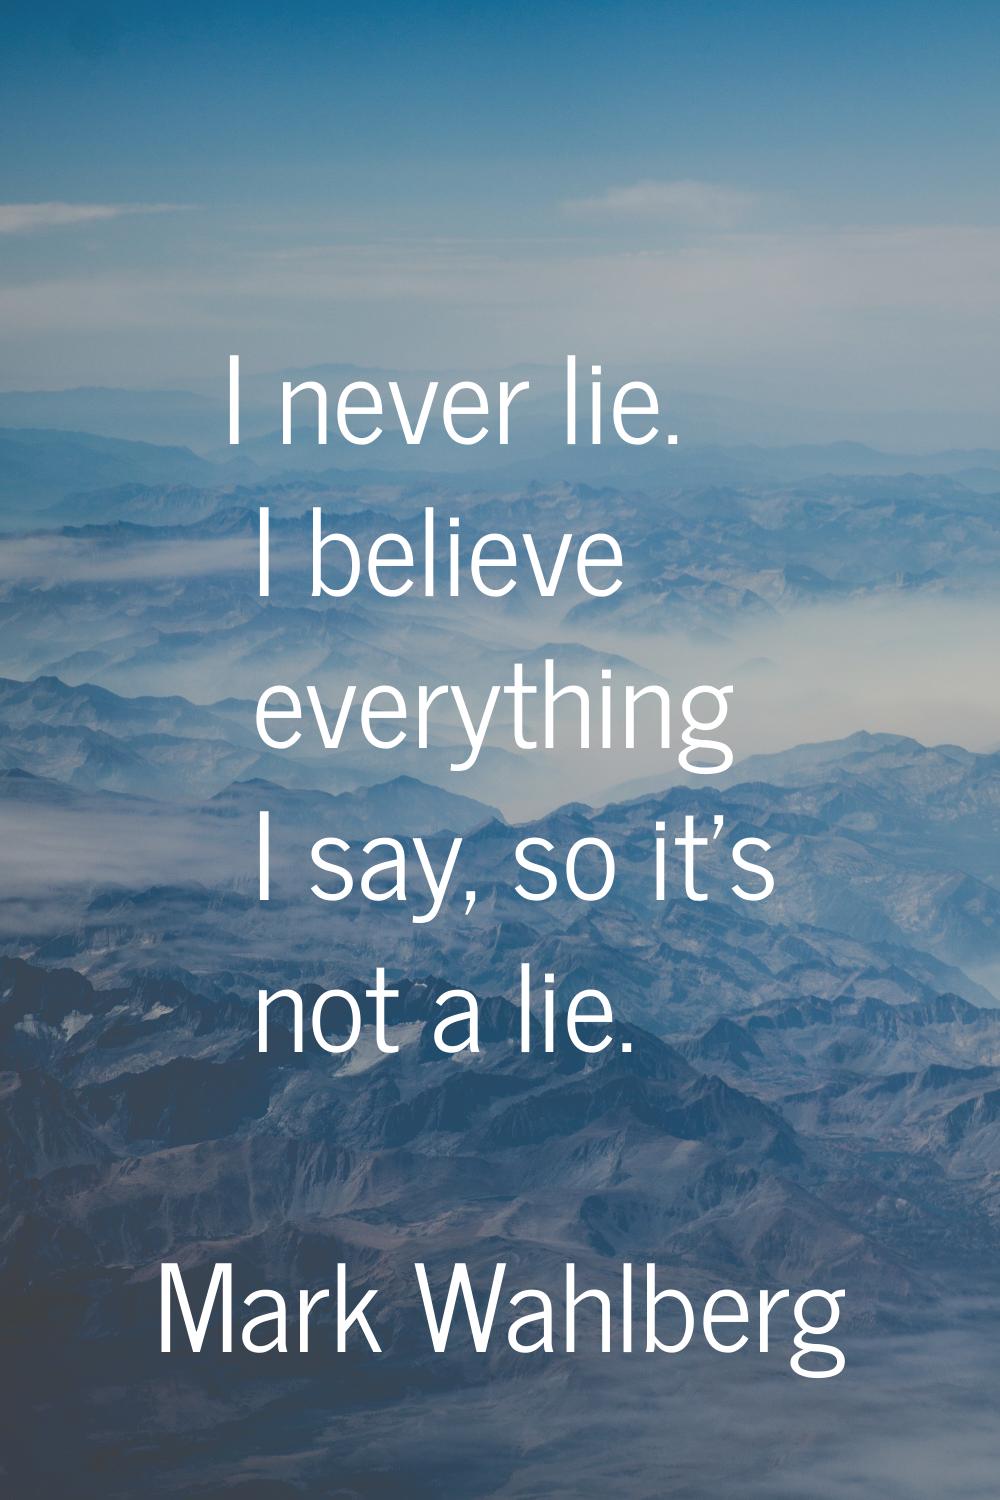 I never lie. I believe everything I say, so it's not a lie.